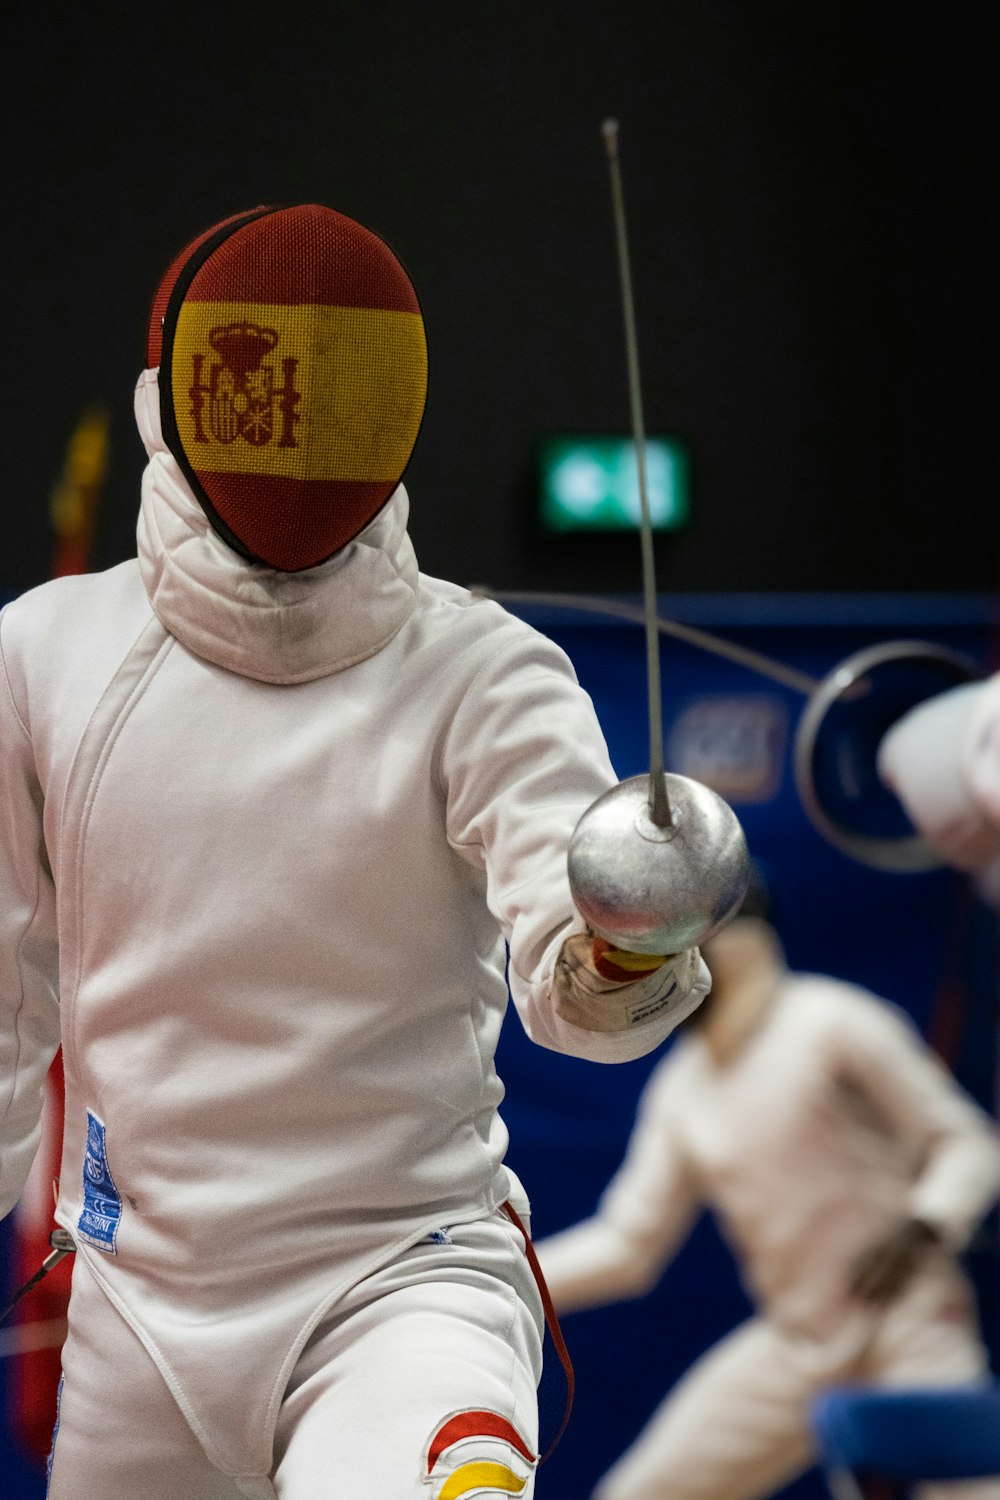 a person in a fencing outfit holding a ball